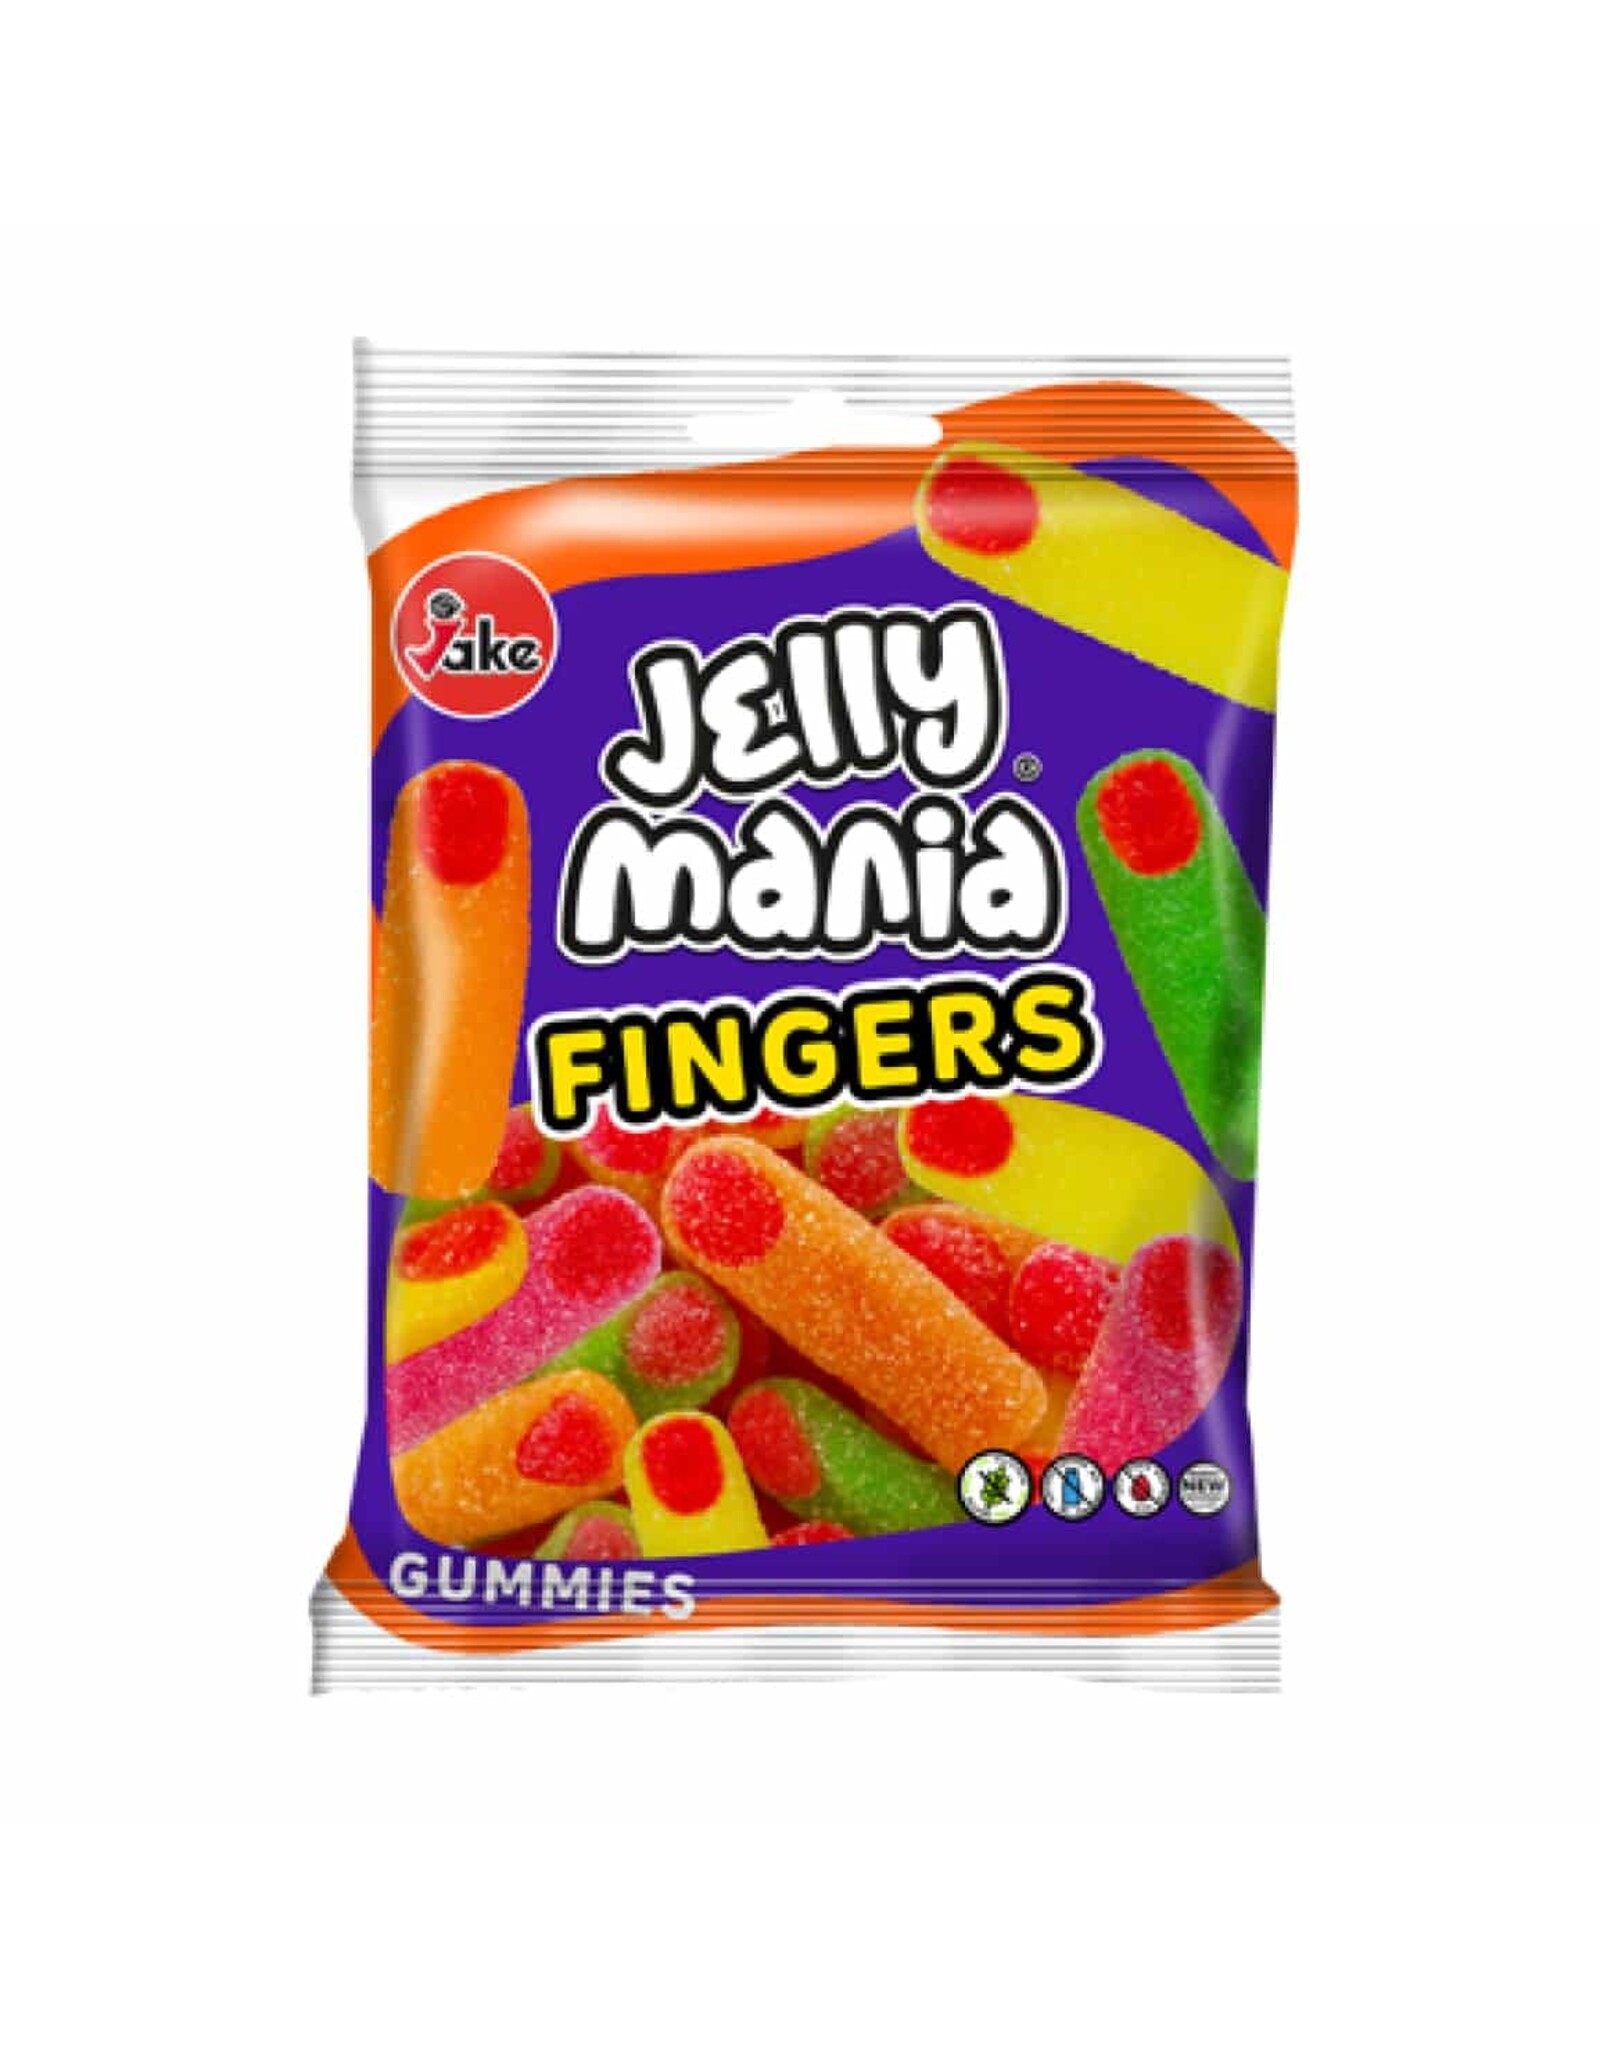 Jelly Mania - Fingers - 100g